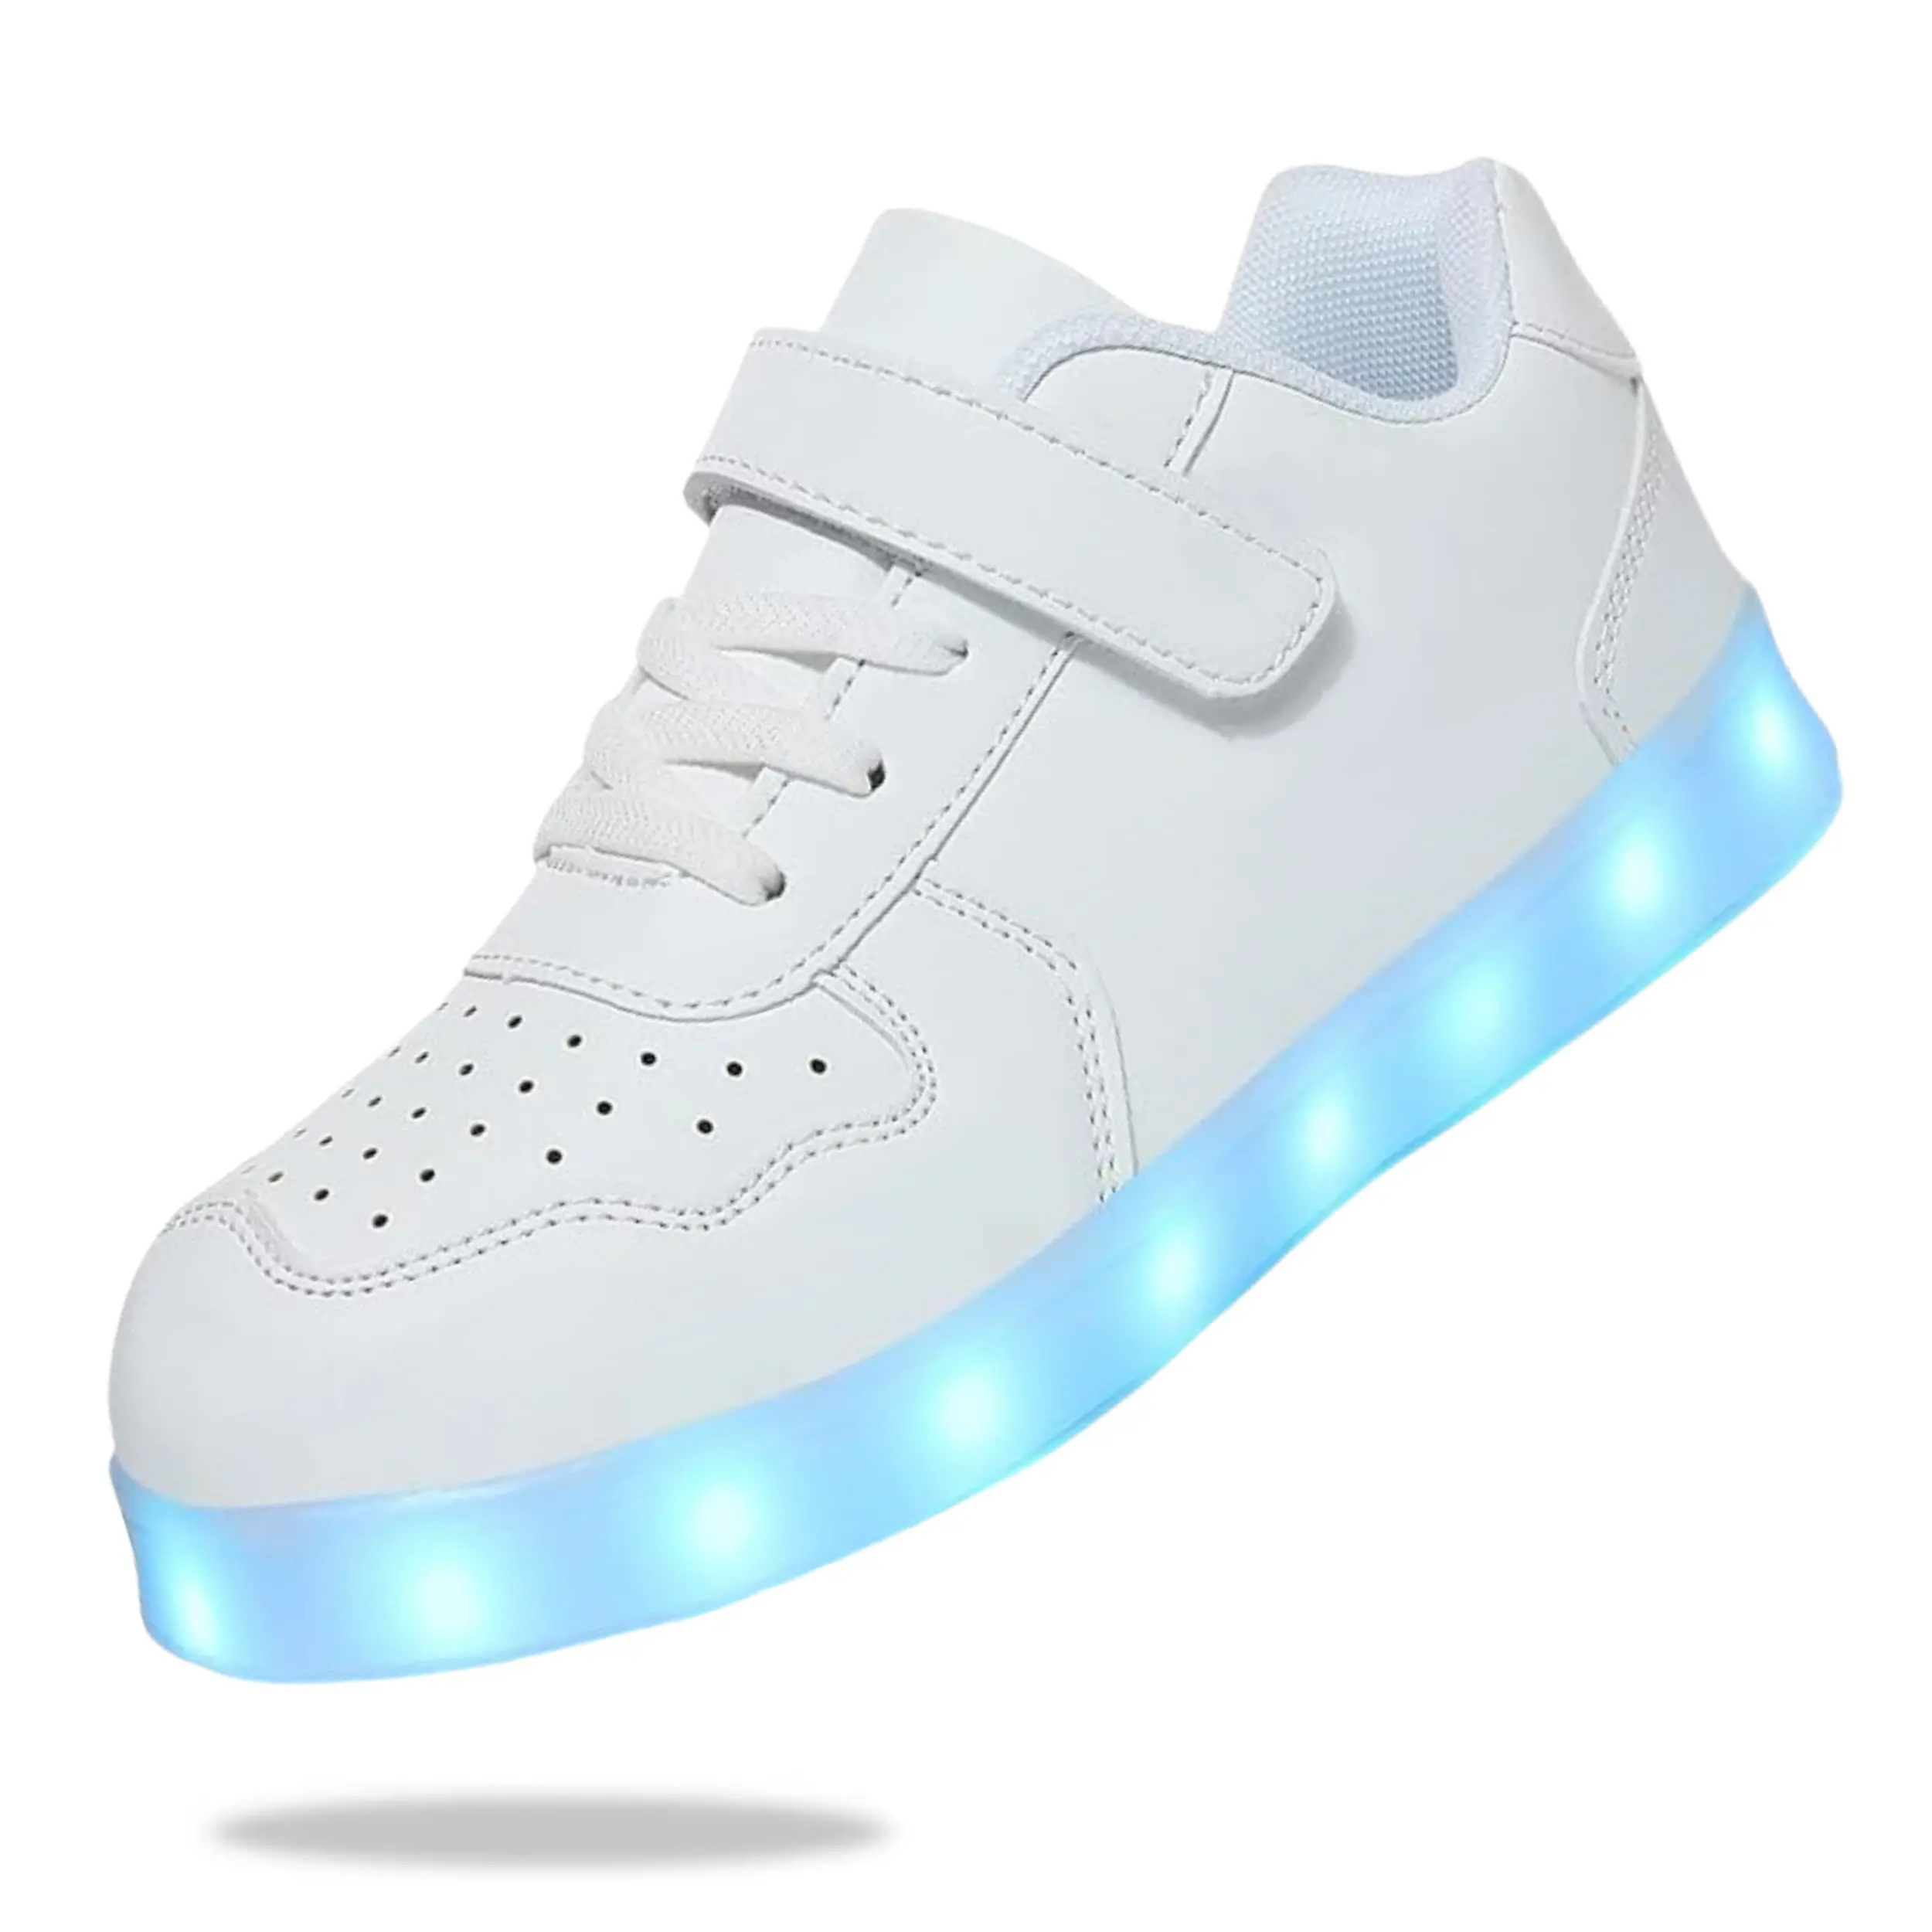 G. DUCK COOL Fashion Children Custom Light Up Shoes Designer Boys and Girls Outdoor Breathable SportsShoes Anti Slip Kid Shoes